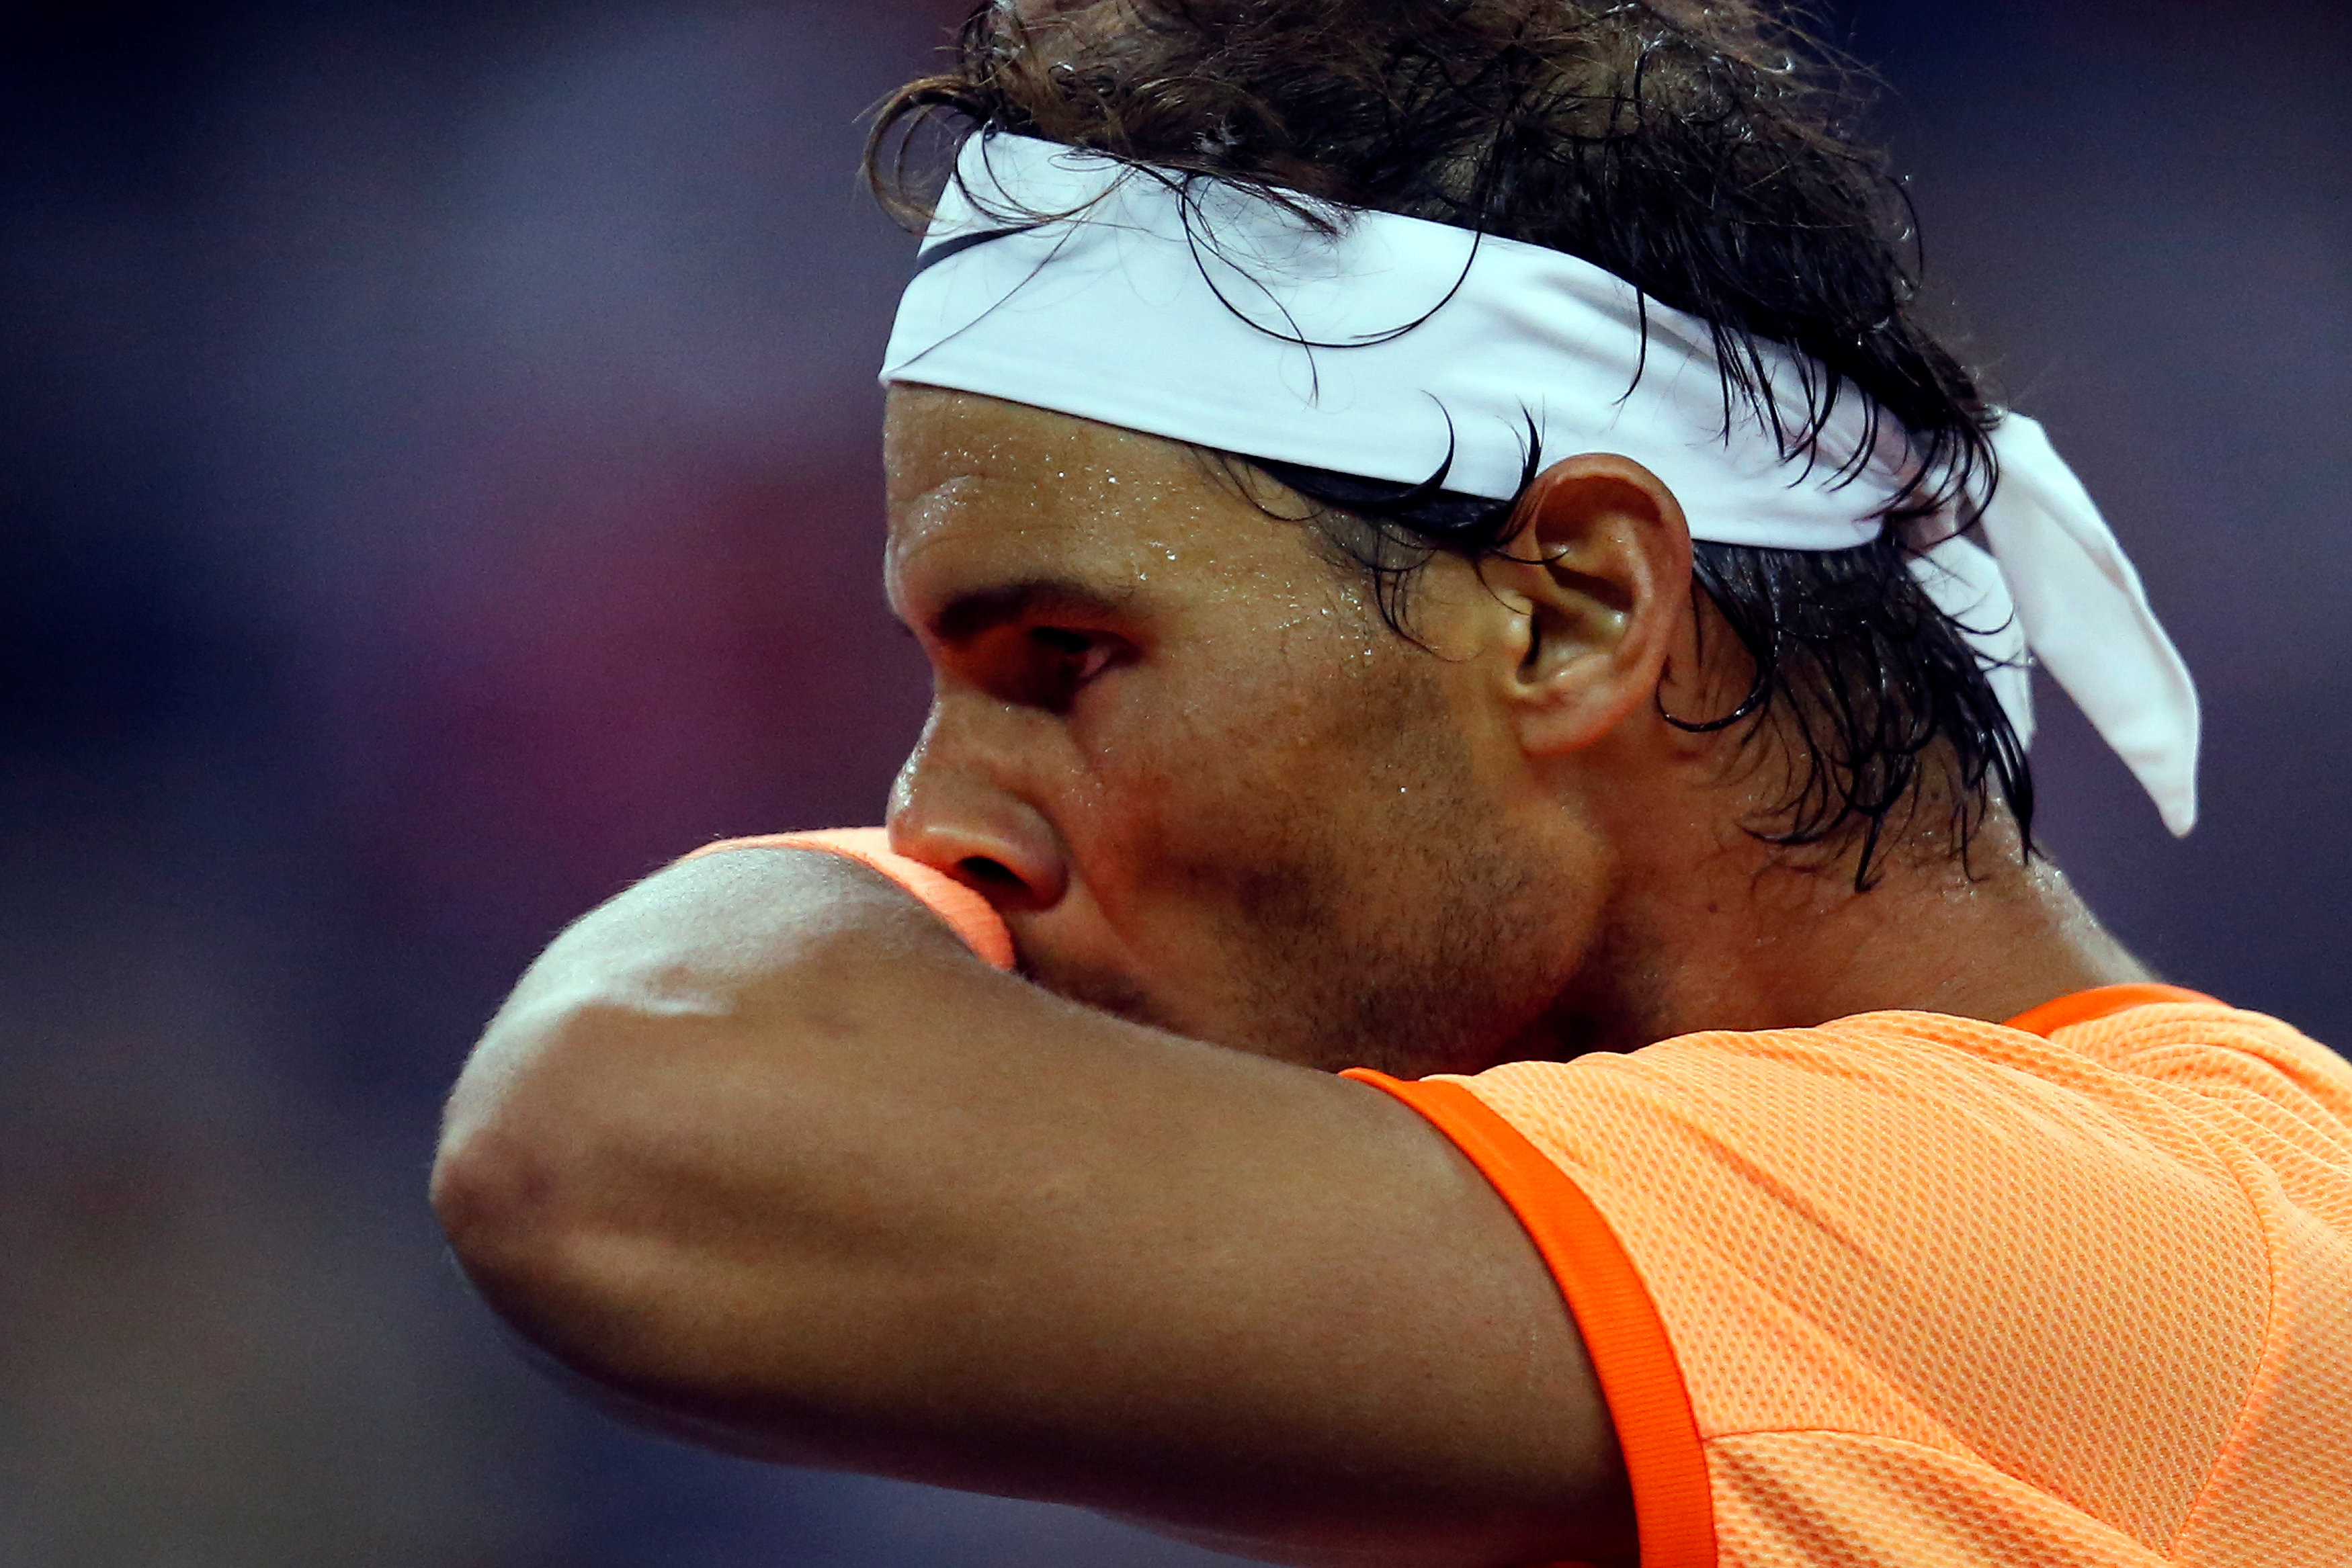 Injured Rafael Nadal Withdraws From The French Open The New